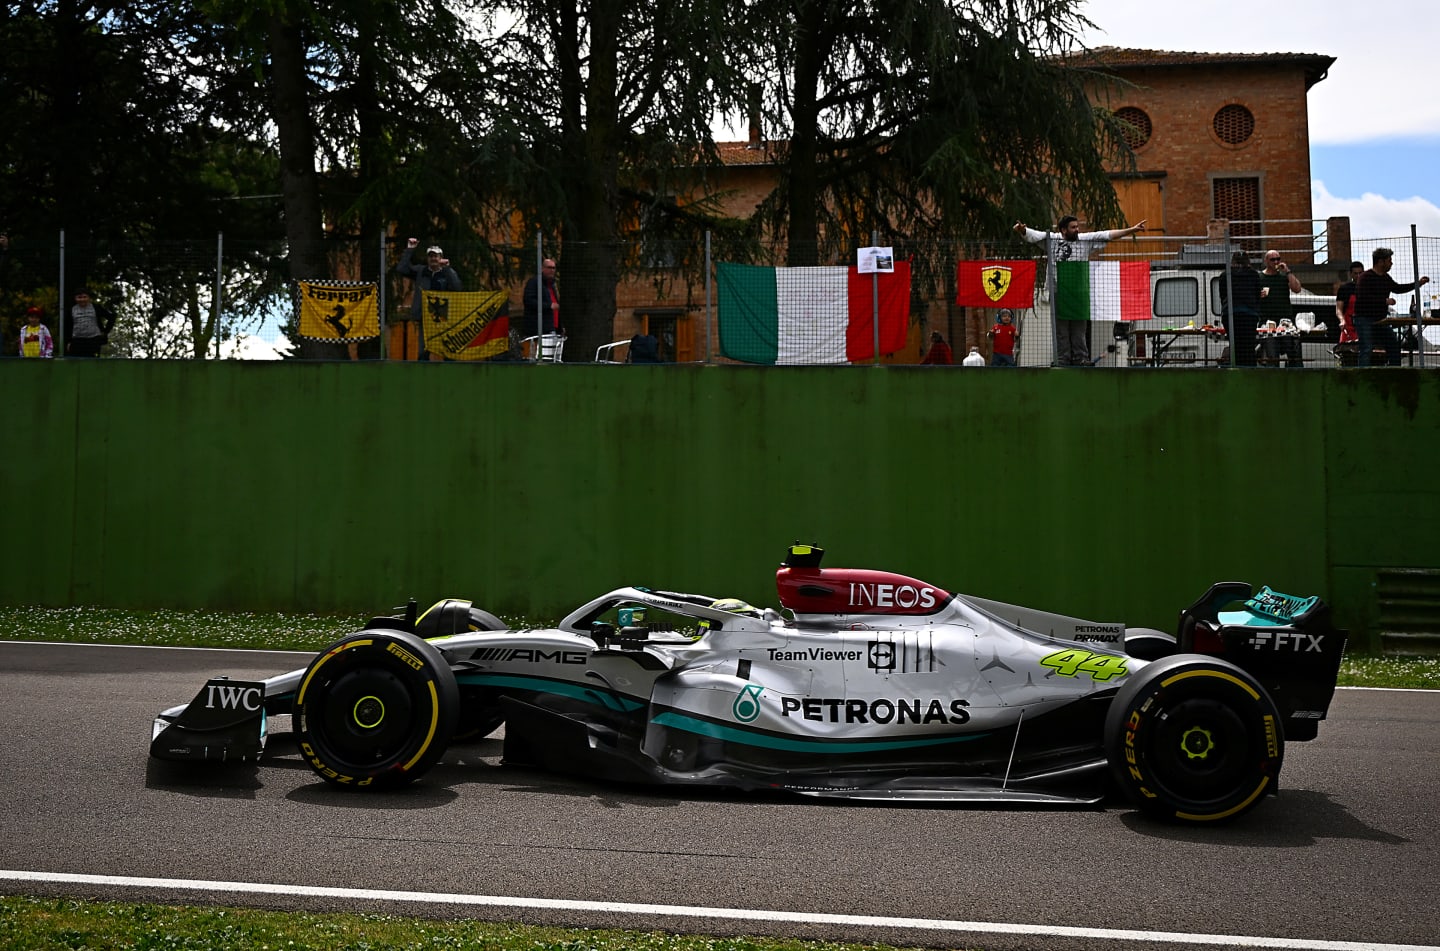 IMOLA, ITALY - APRIL 23: Lewis Hamilton of Great Britain driving the (44) Mercedes AMG Petronas F1 Team W13 on track during practice ahead of the F1 Grand Prix of Emilia Romagna at Autodromo Enzo e Dino Ferrari on April 23, 2022 in Imola, Italy. (Photo by Clive Mason/Getty Images)